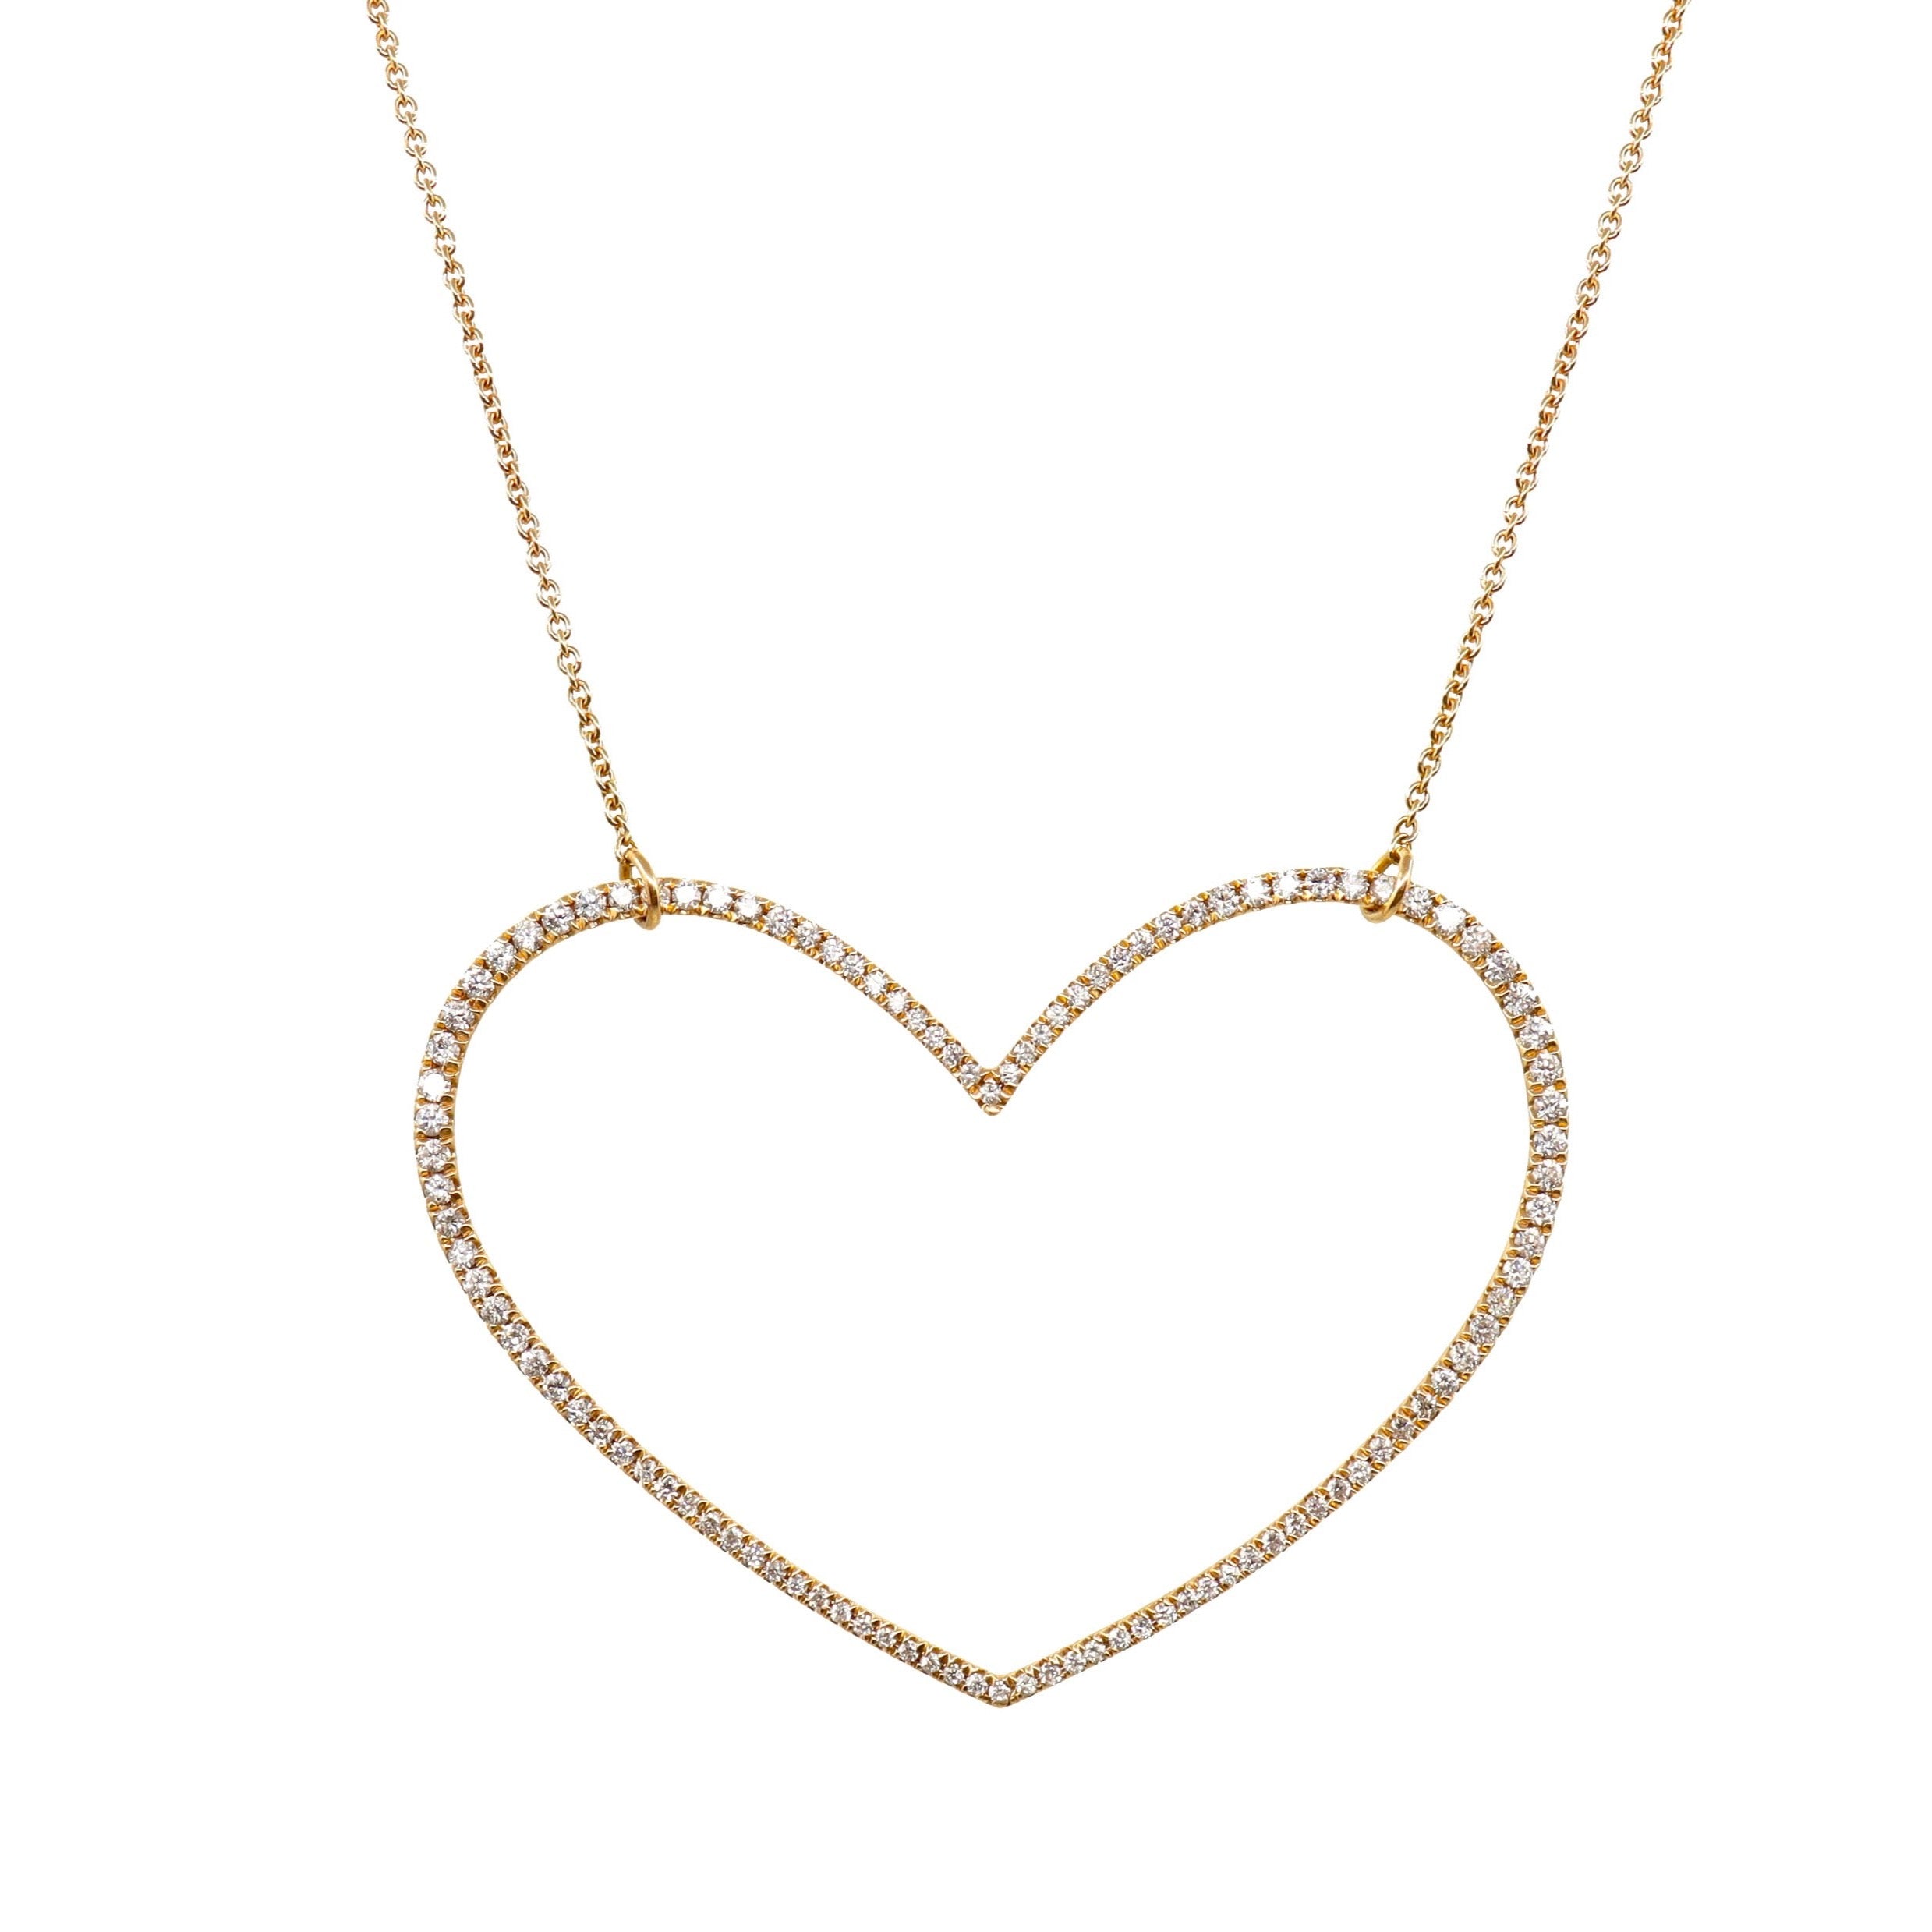 MOVABLE HEART NECKLACE - 50MM